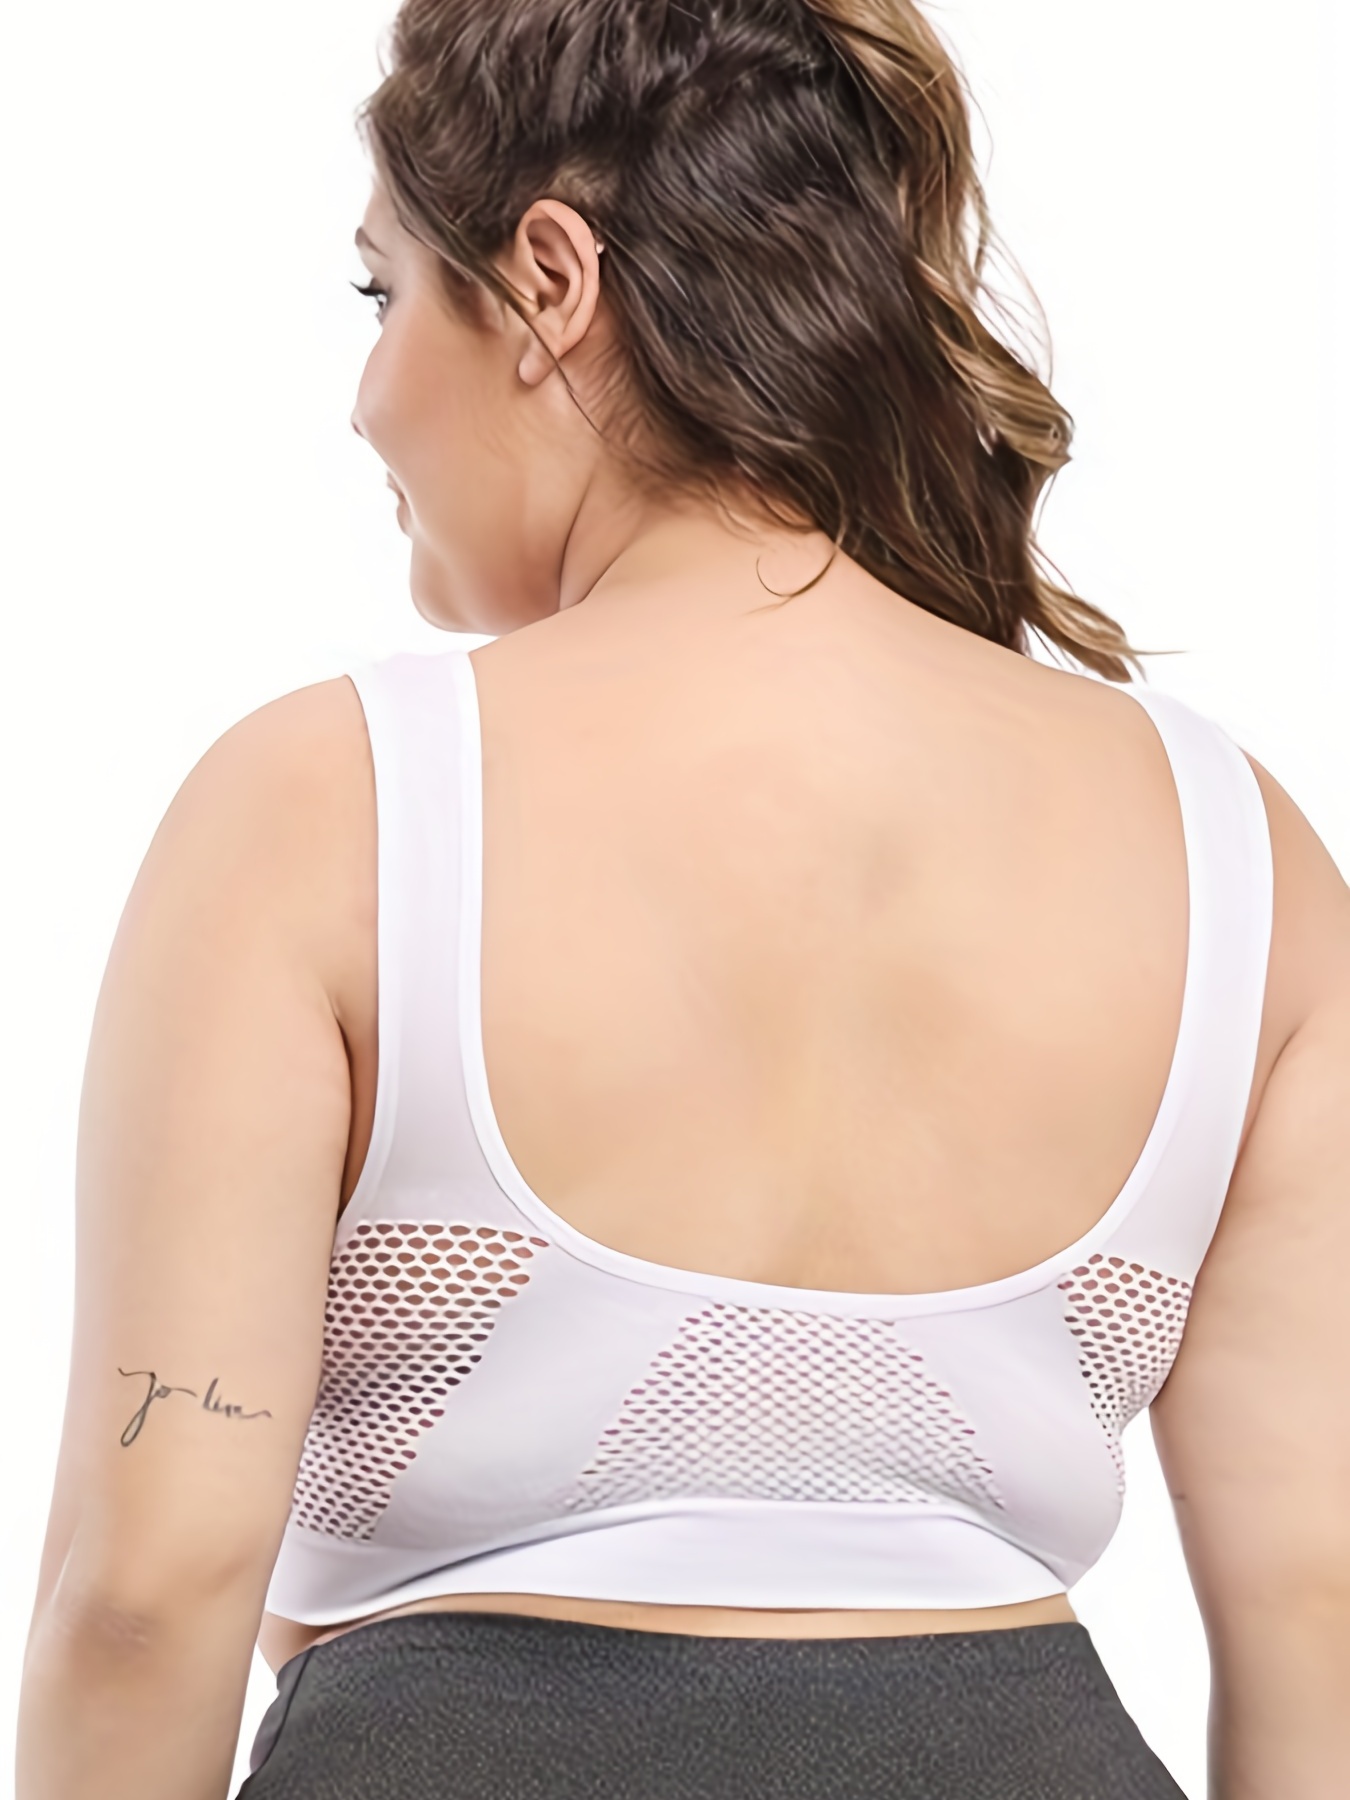 Breathable Sports Bras Women Hollow Out Padded Sports Bra Top Plus Size Gym  Running Fitness Yoga Sports Tops(White,3XL) 